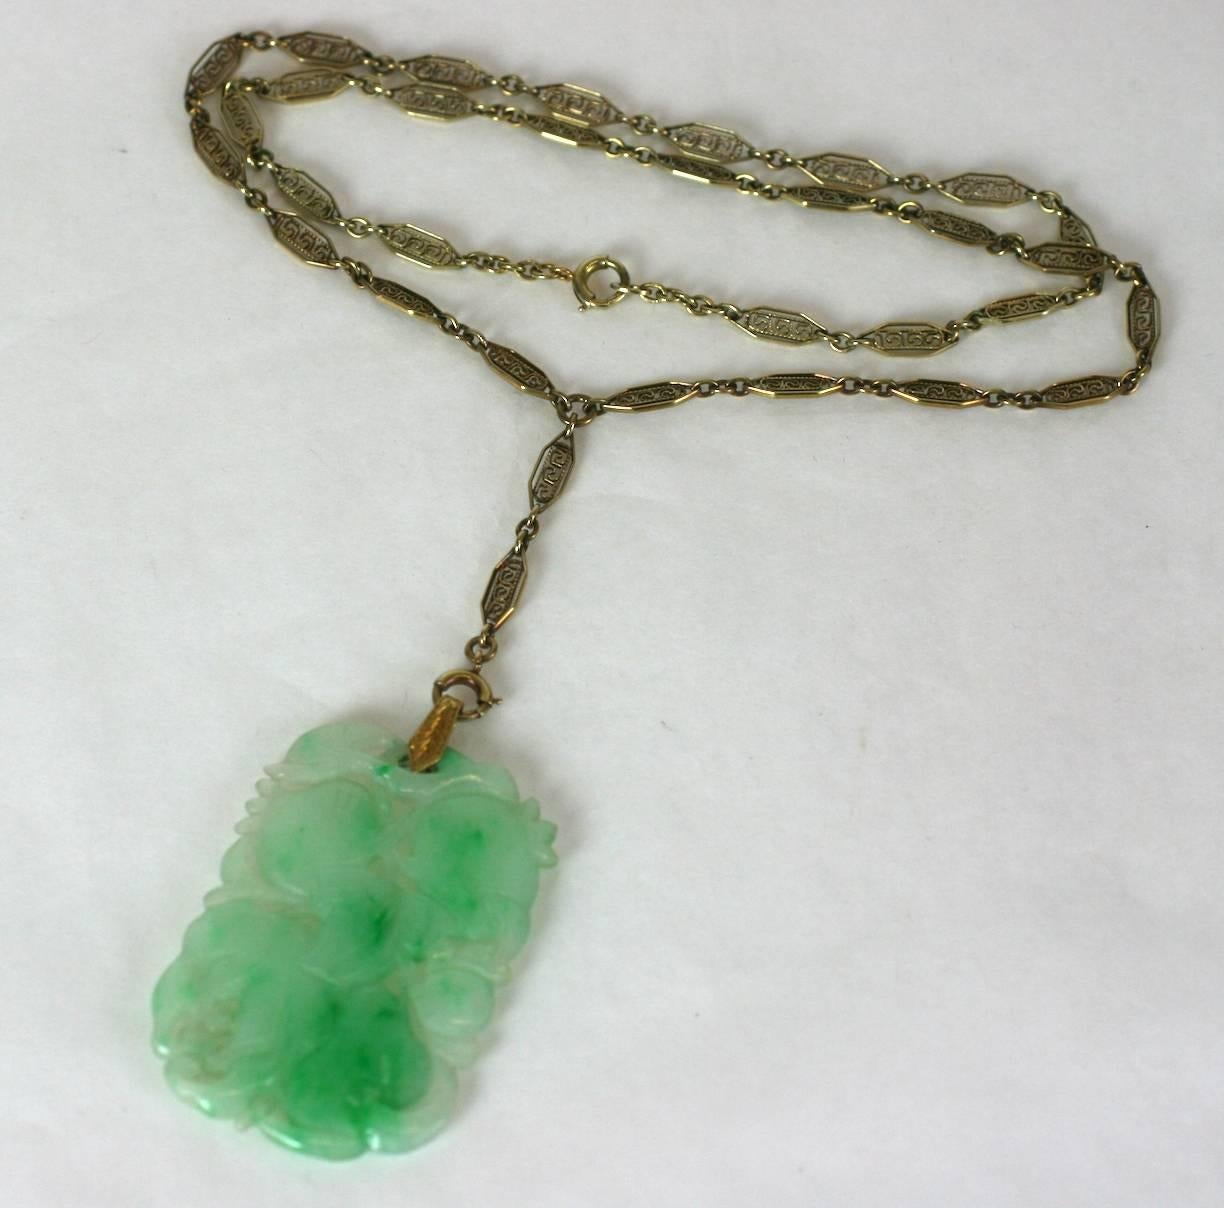 Art Deco Jade Pendant on ornate wirework lorgnette chain. Natural jade is hand carved and pierced with fruit and leaf motifs. Intricate 14k Art Deco wirework link chain ends in an engraved bale suspending the jade pendant. 1920's USA. Jade, Chinese